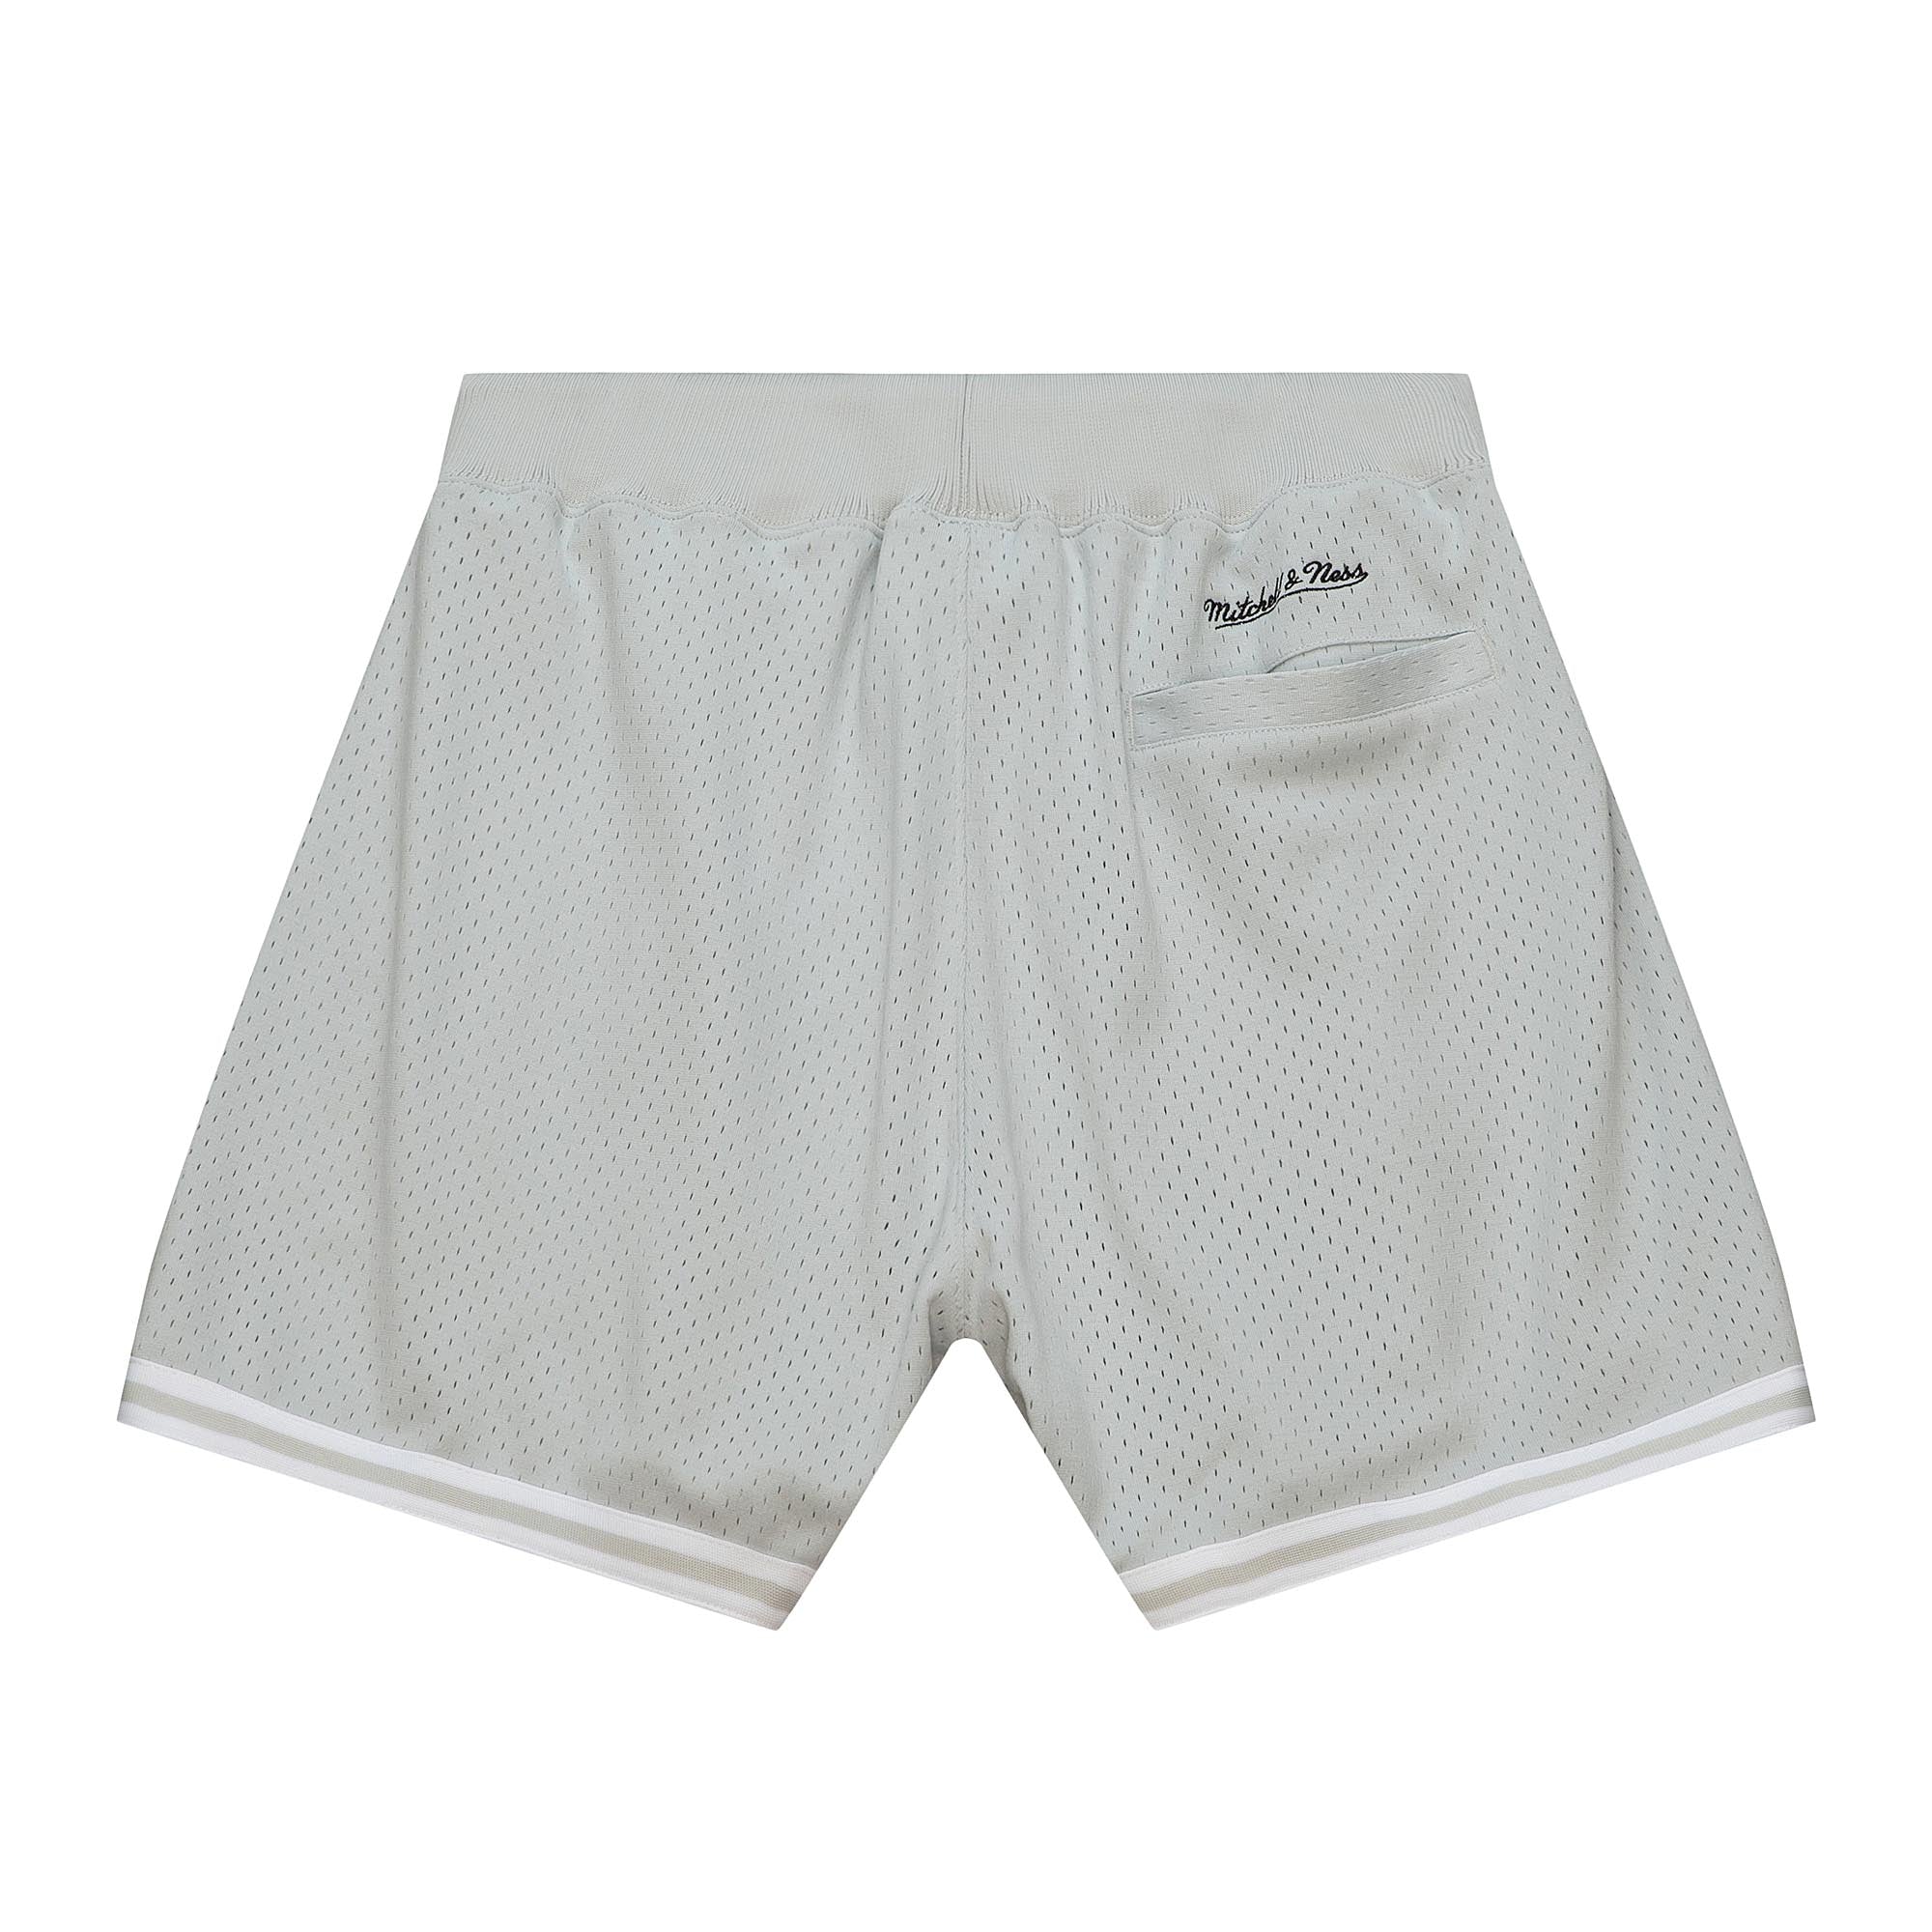 Game Day 2.0 Shorts - Own Brand Light Grey